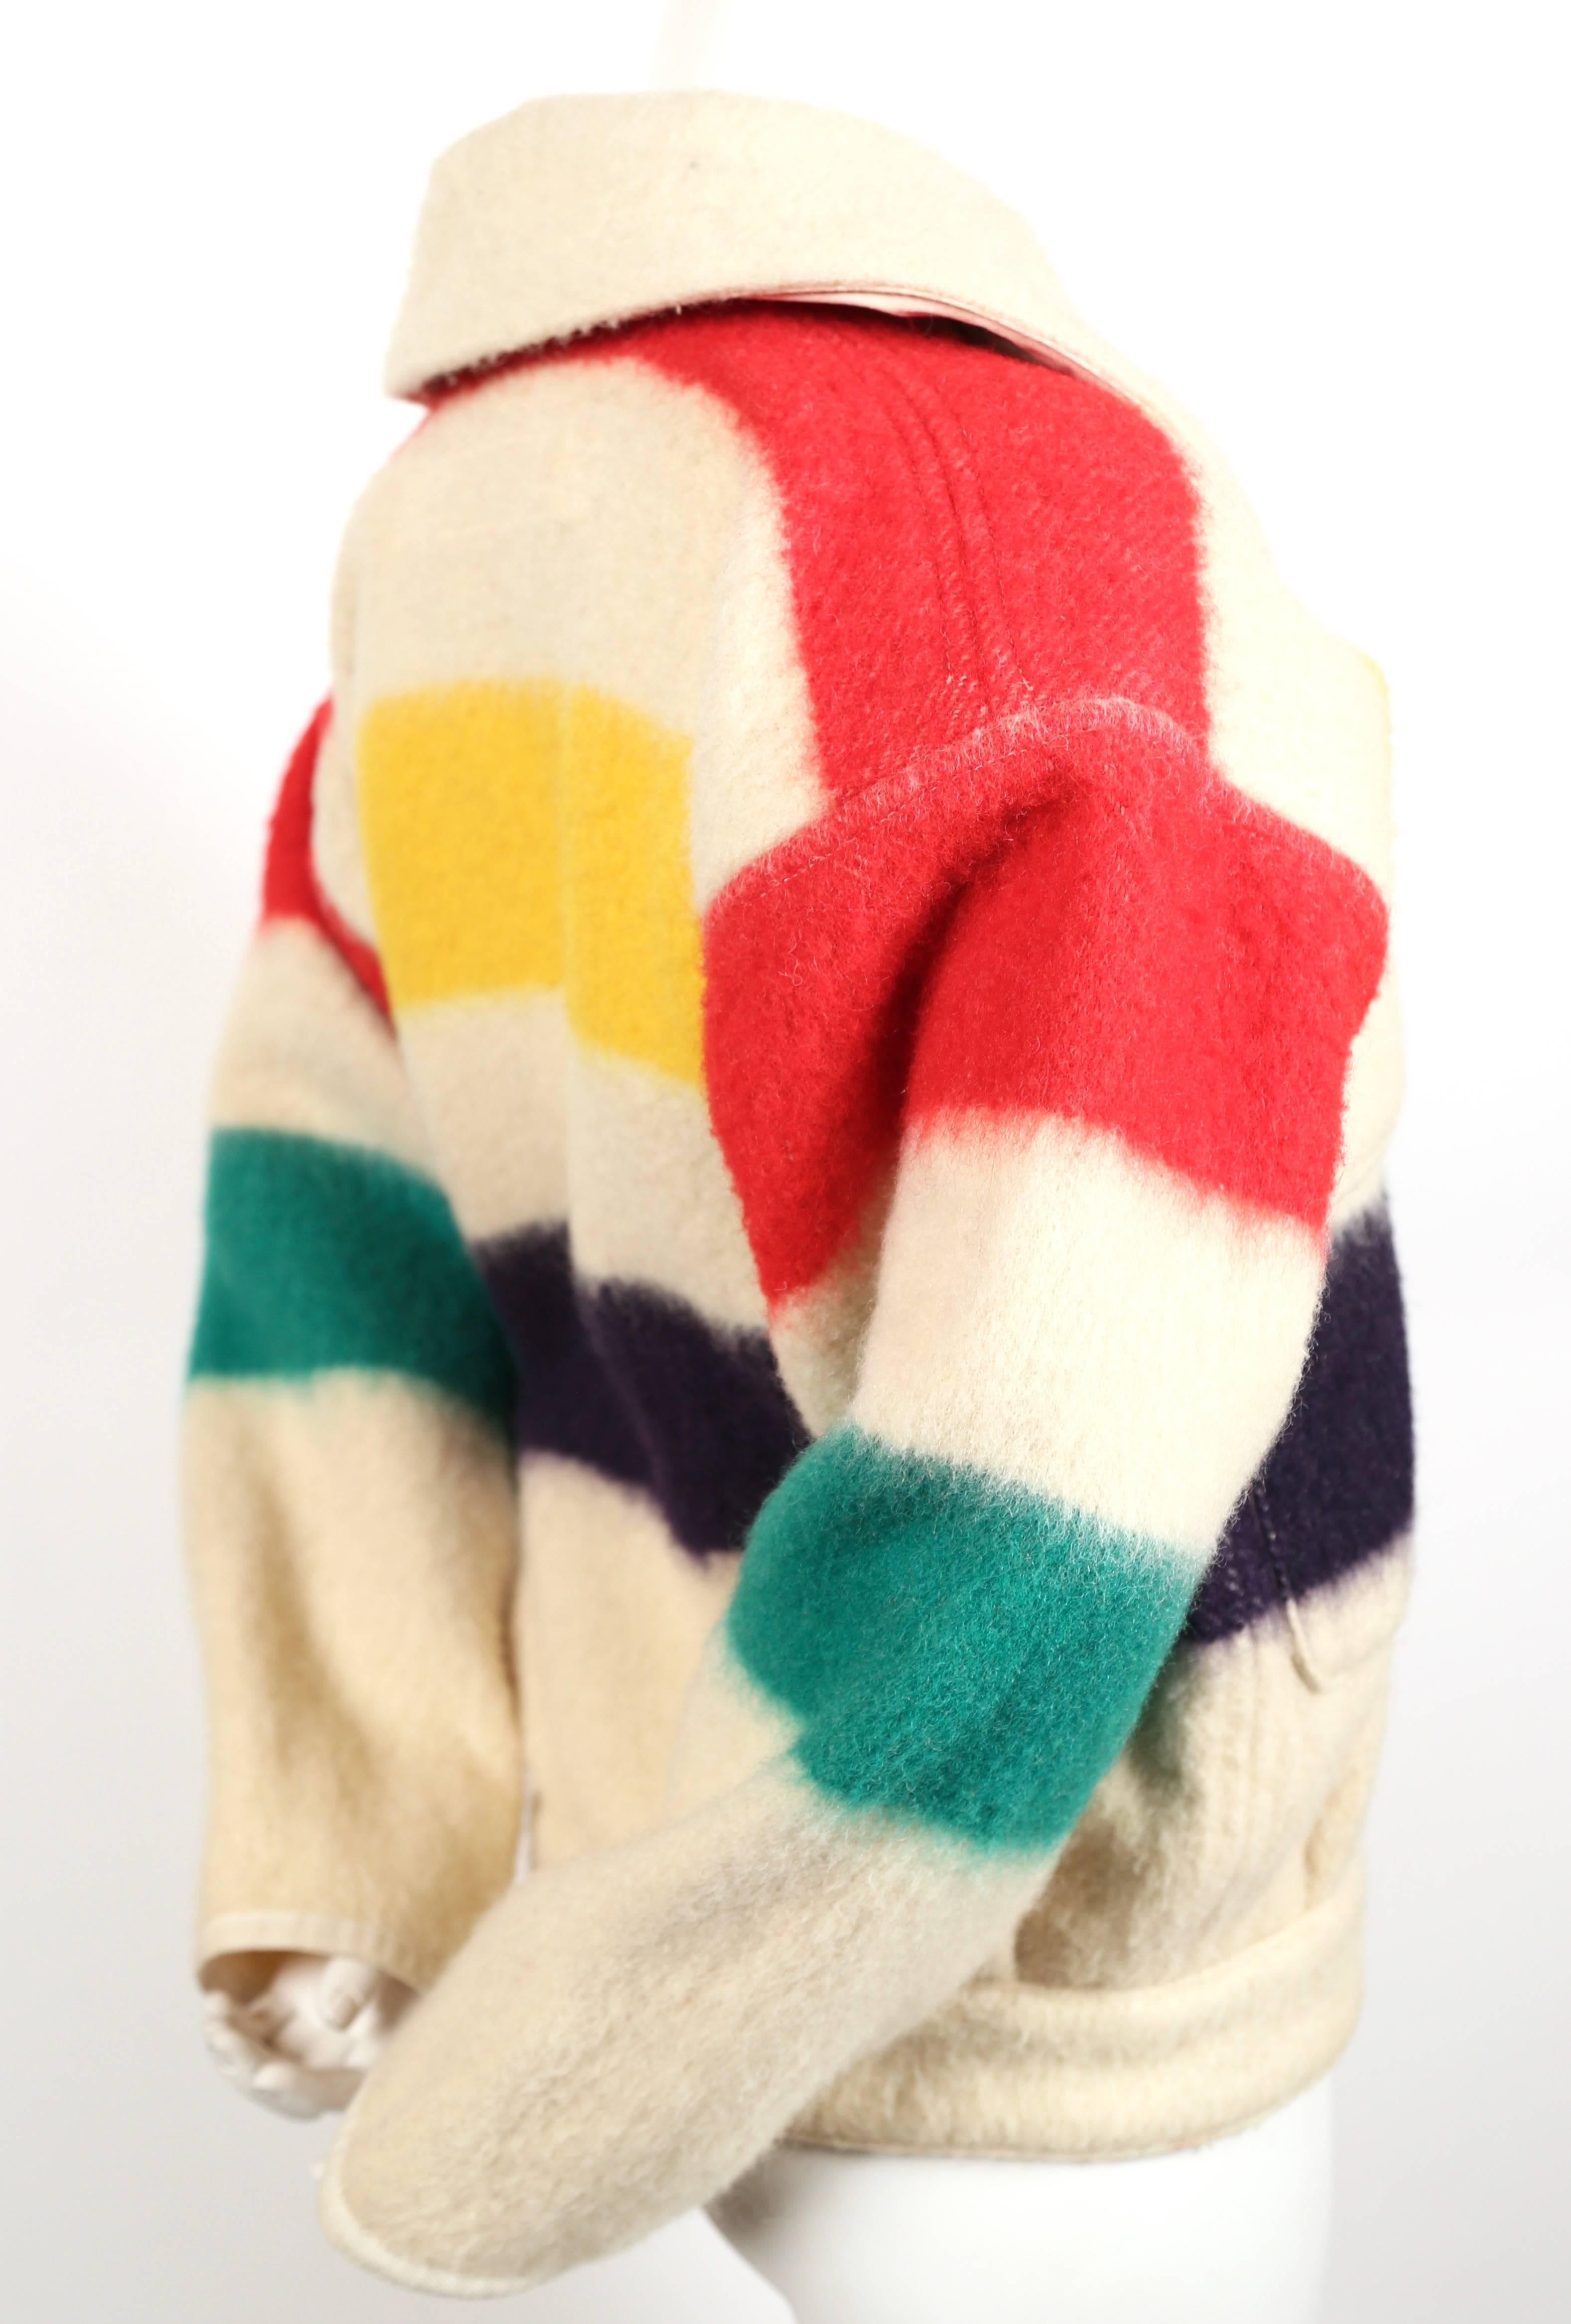  'Hudson bay' wool blanket jacket from Jean-Charles de Castelbajac dating to the late 1970's. Large dramatic collar. Patch pockets at front chest. Coat can be worn by a woman or small man. Best fits a US women's size 2-6. Approximate measurements: